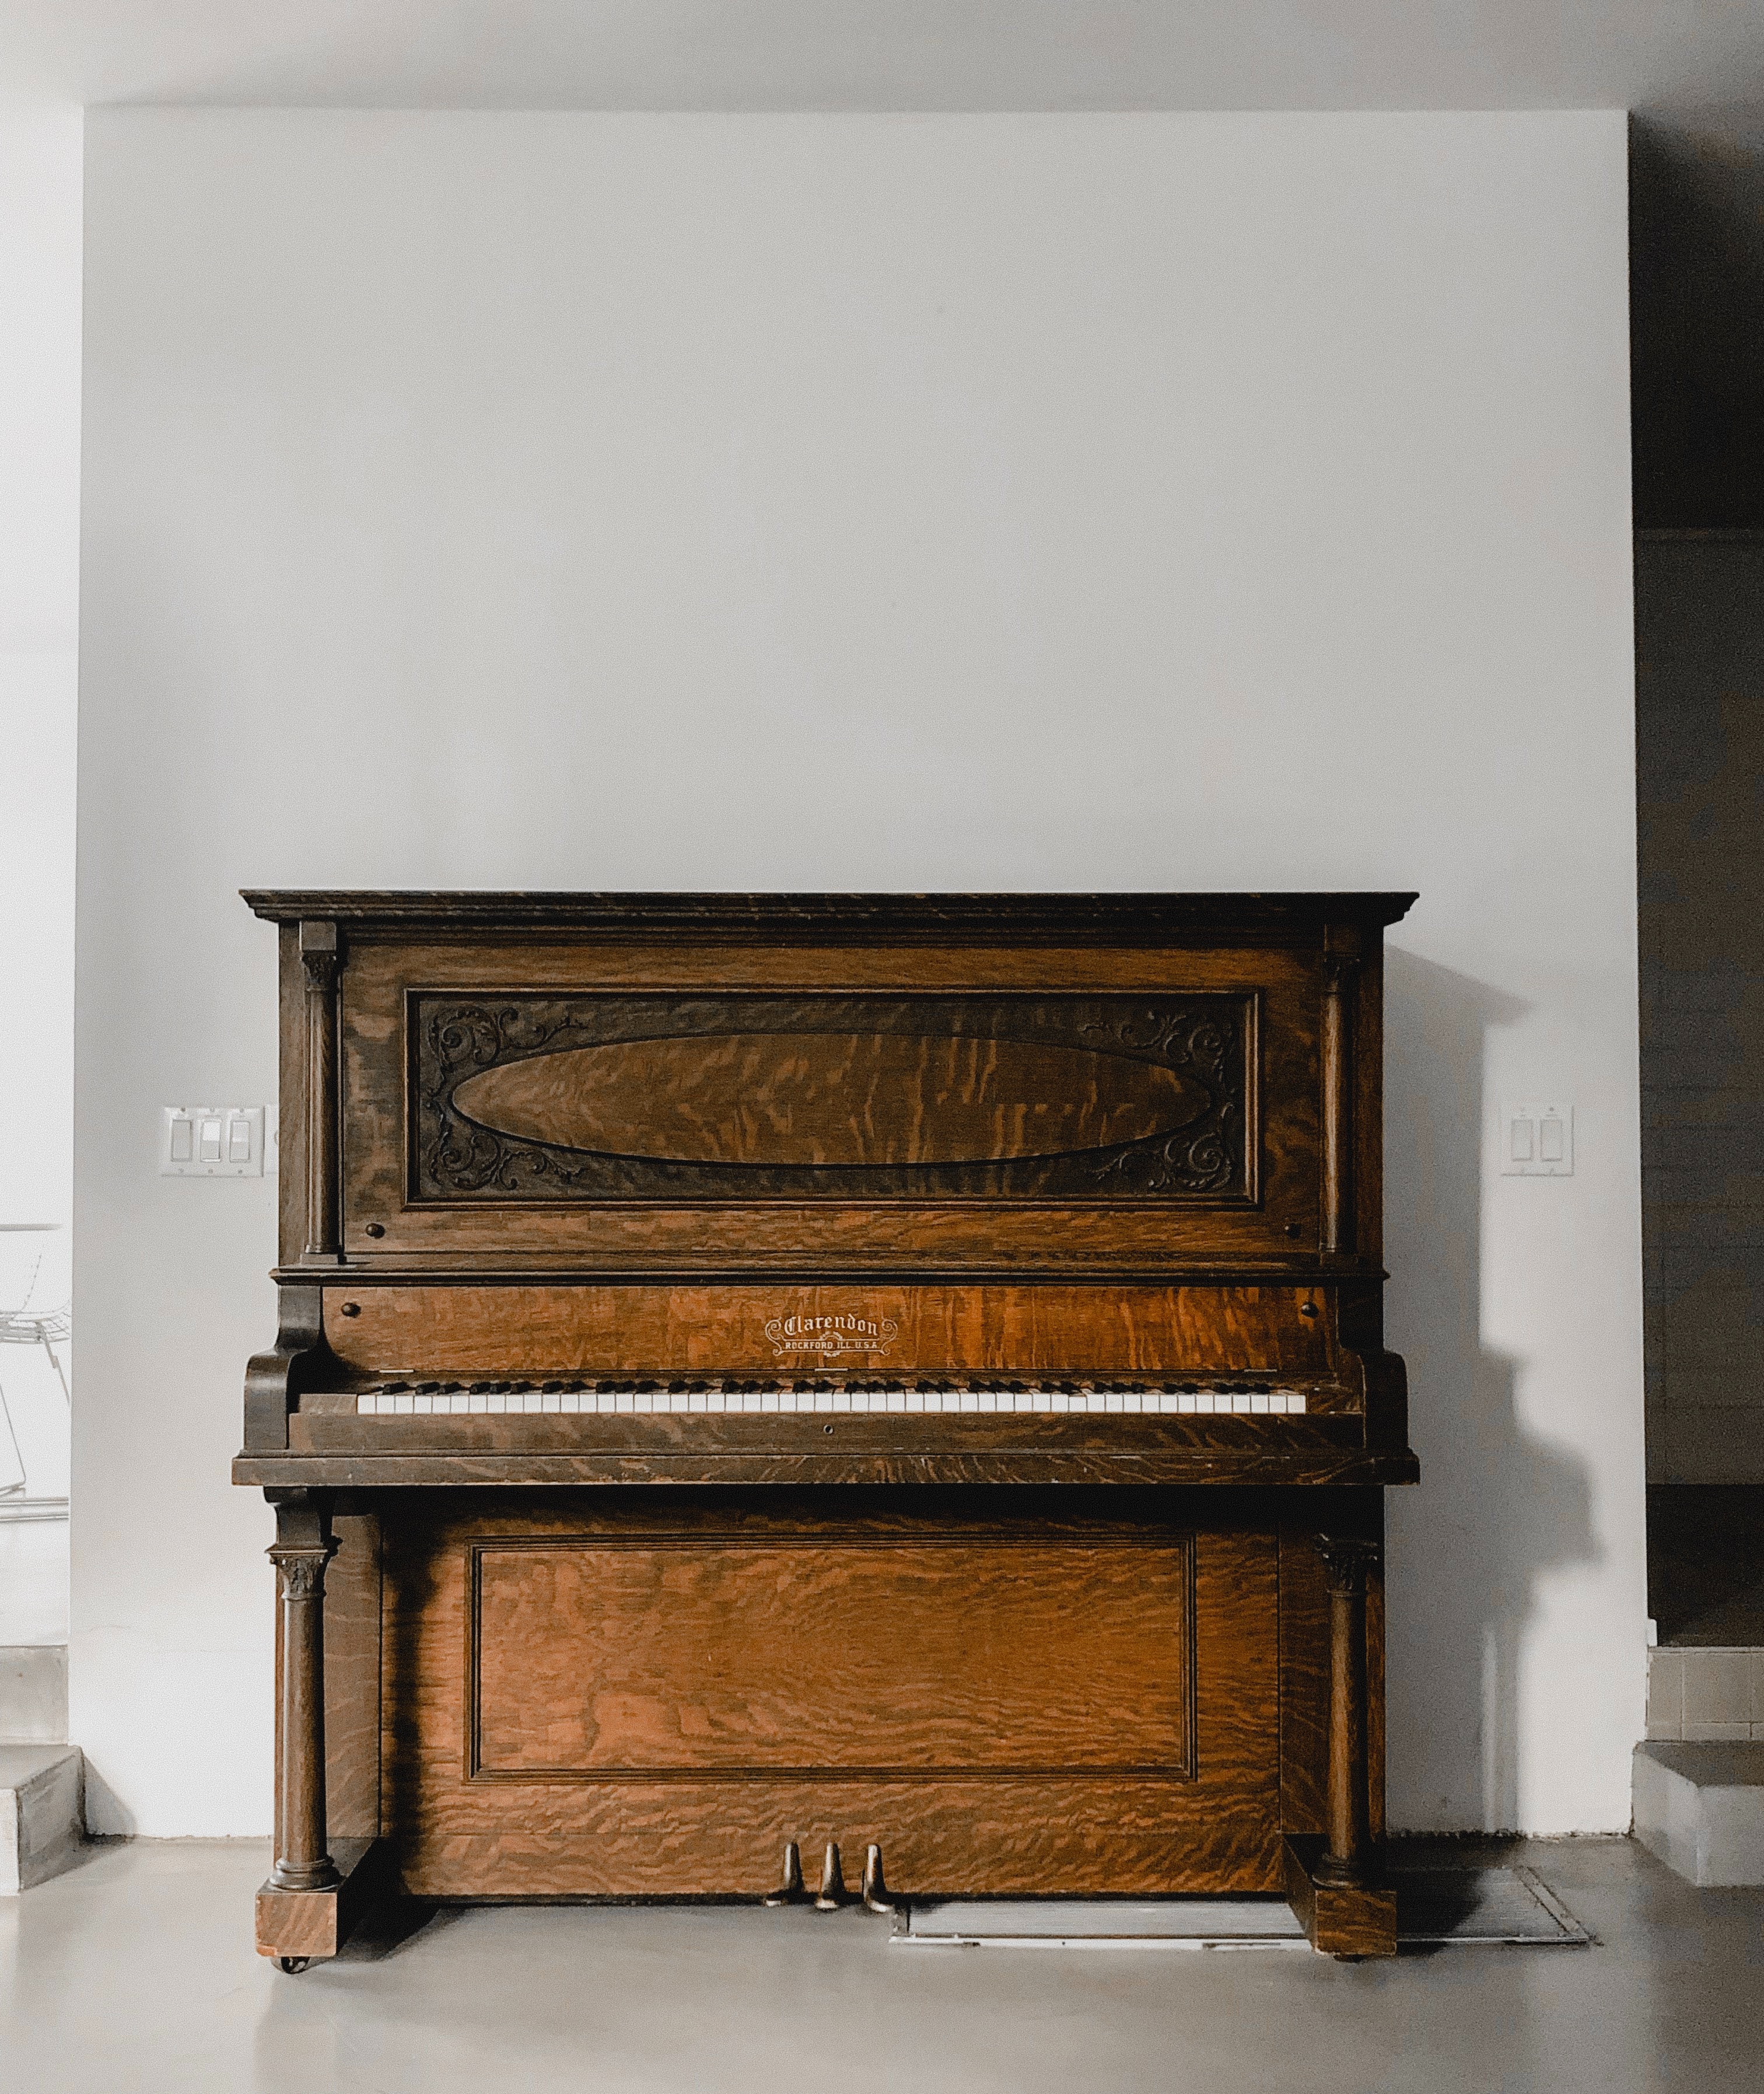 Piano sitting against white wall